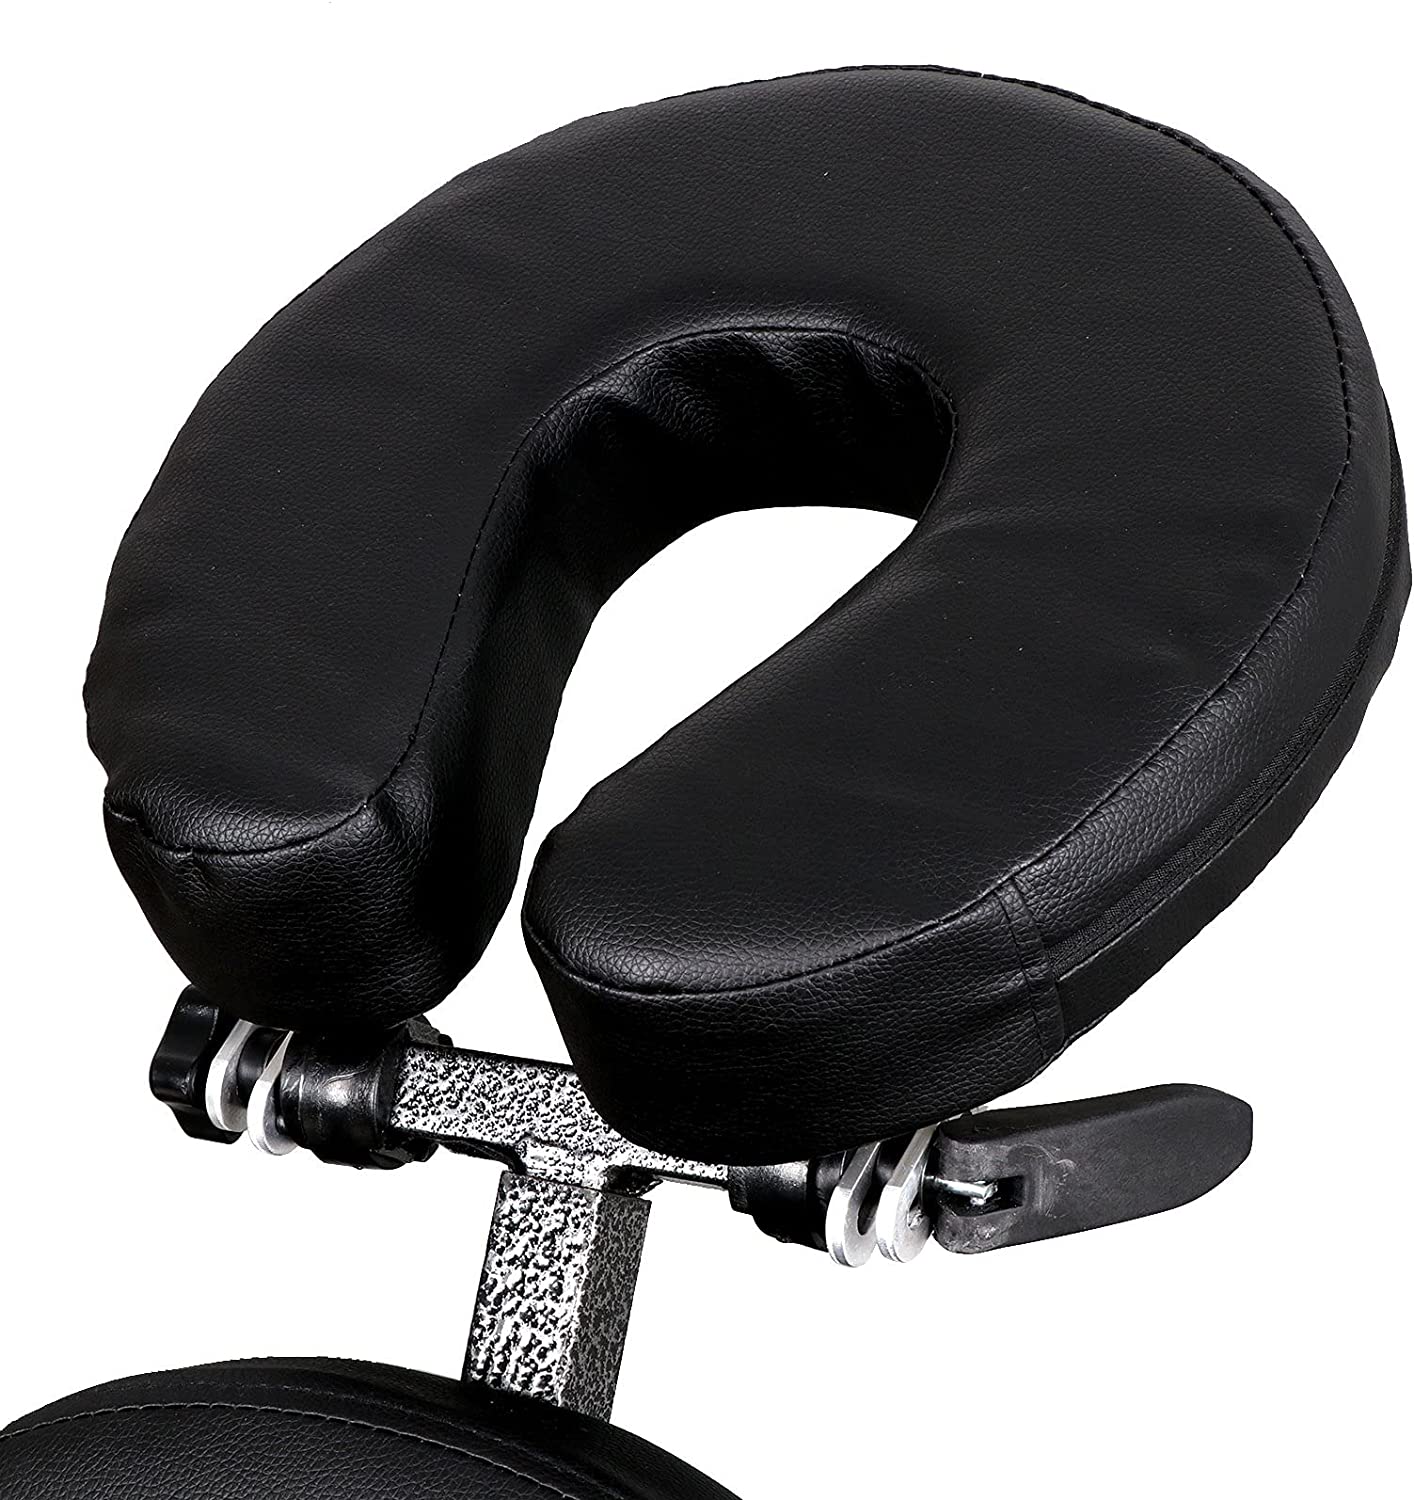 Portable Massage Chair Foldable Tattoo Chair Adjustable Therapy Chair with Face Cradle Comfortable Thick Foam w/Carrying Bag